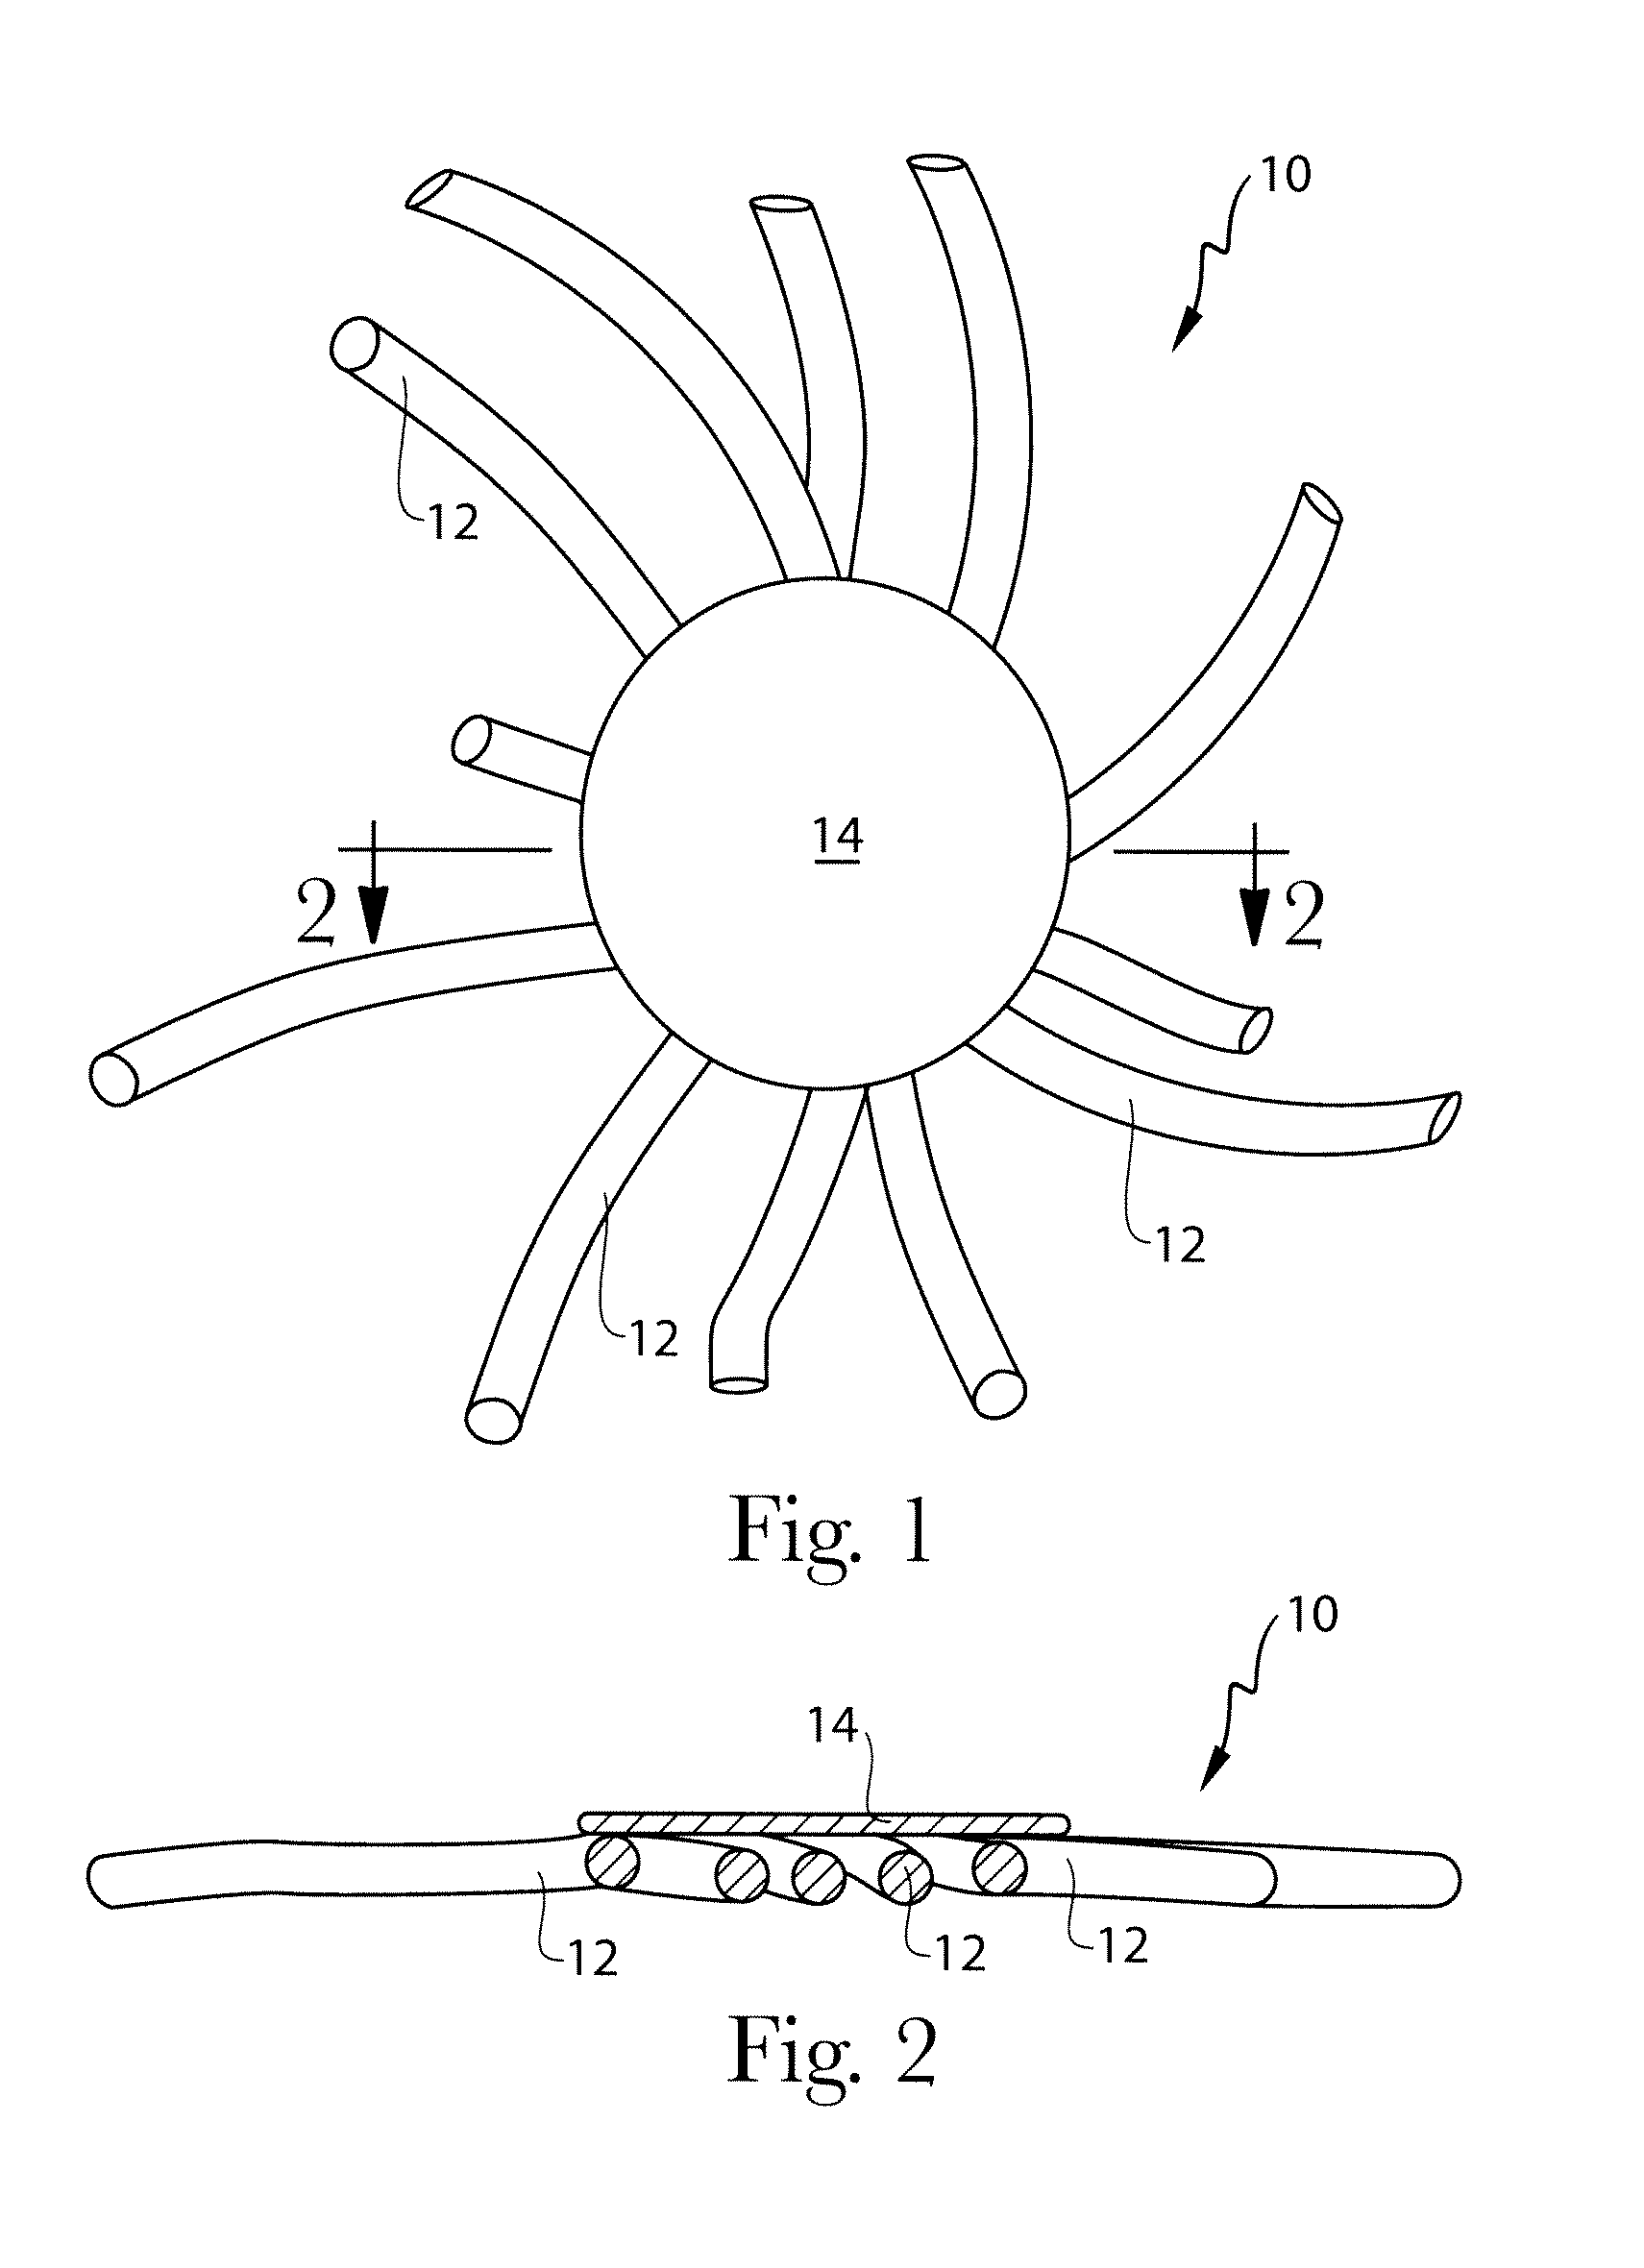 Filaments comprising a non-perfume active agent nonwoven webs and methods for making same